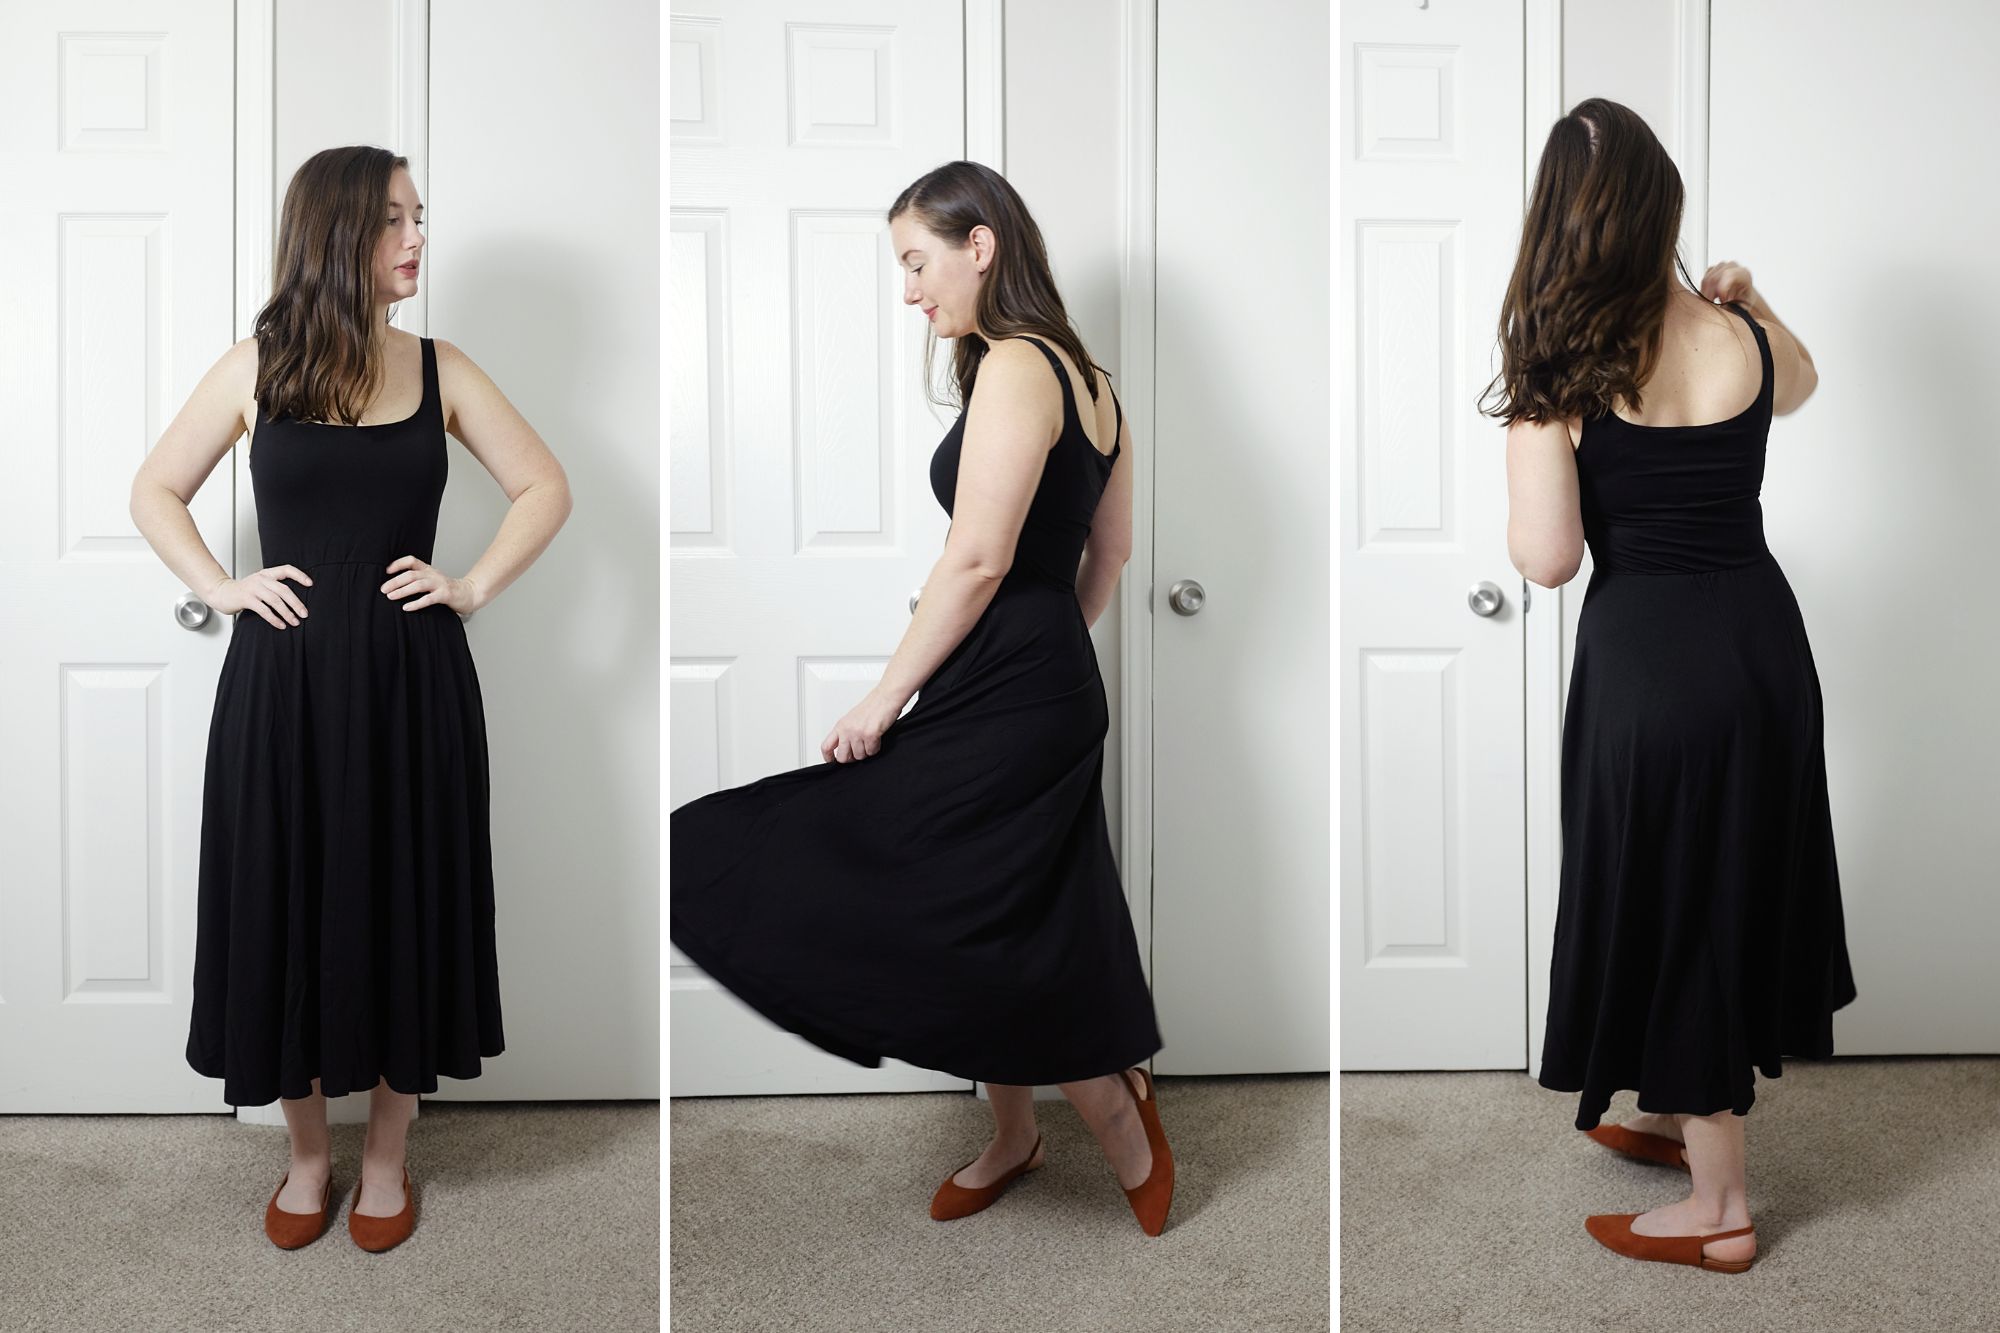 Alyssa wears the Tencel Jersey Fit & Flare Dress from Quince in a series of three photos